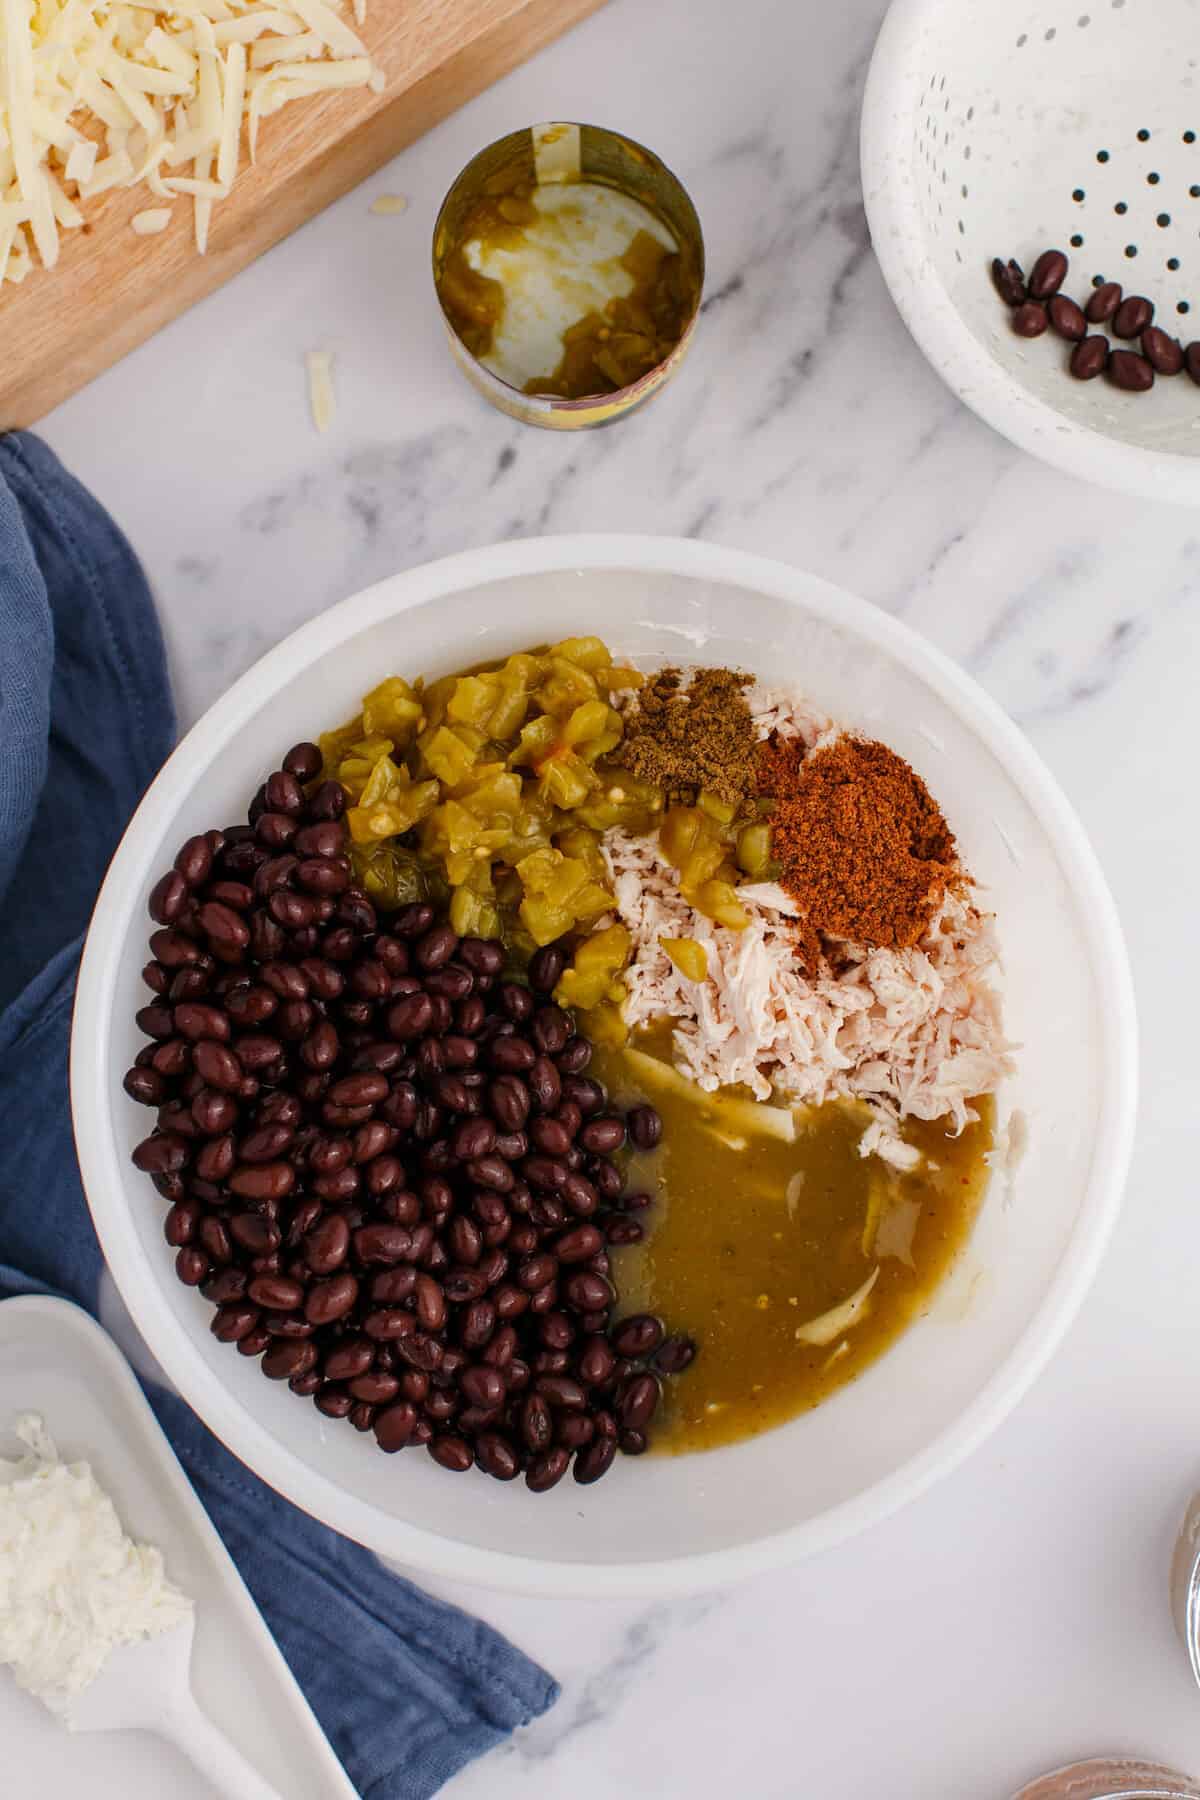 large white bowl with the chiles, sauces, beans, and seasonings.